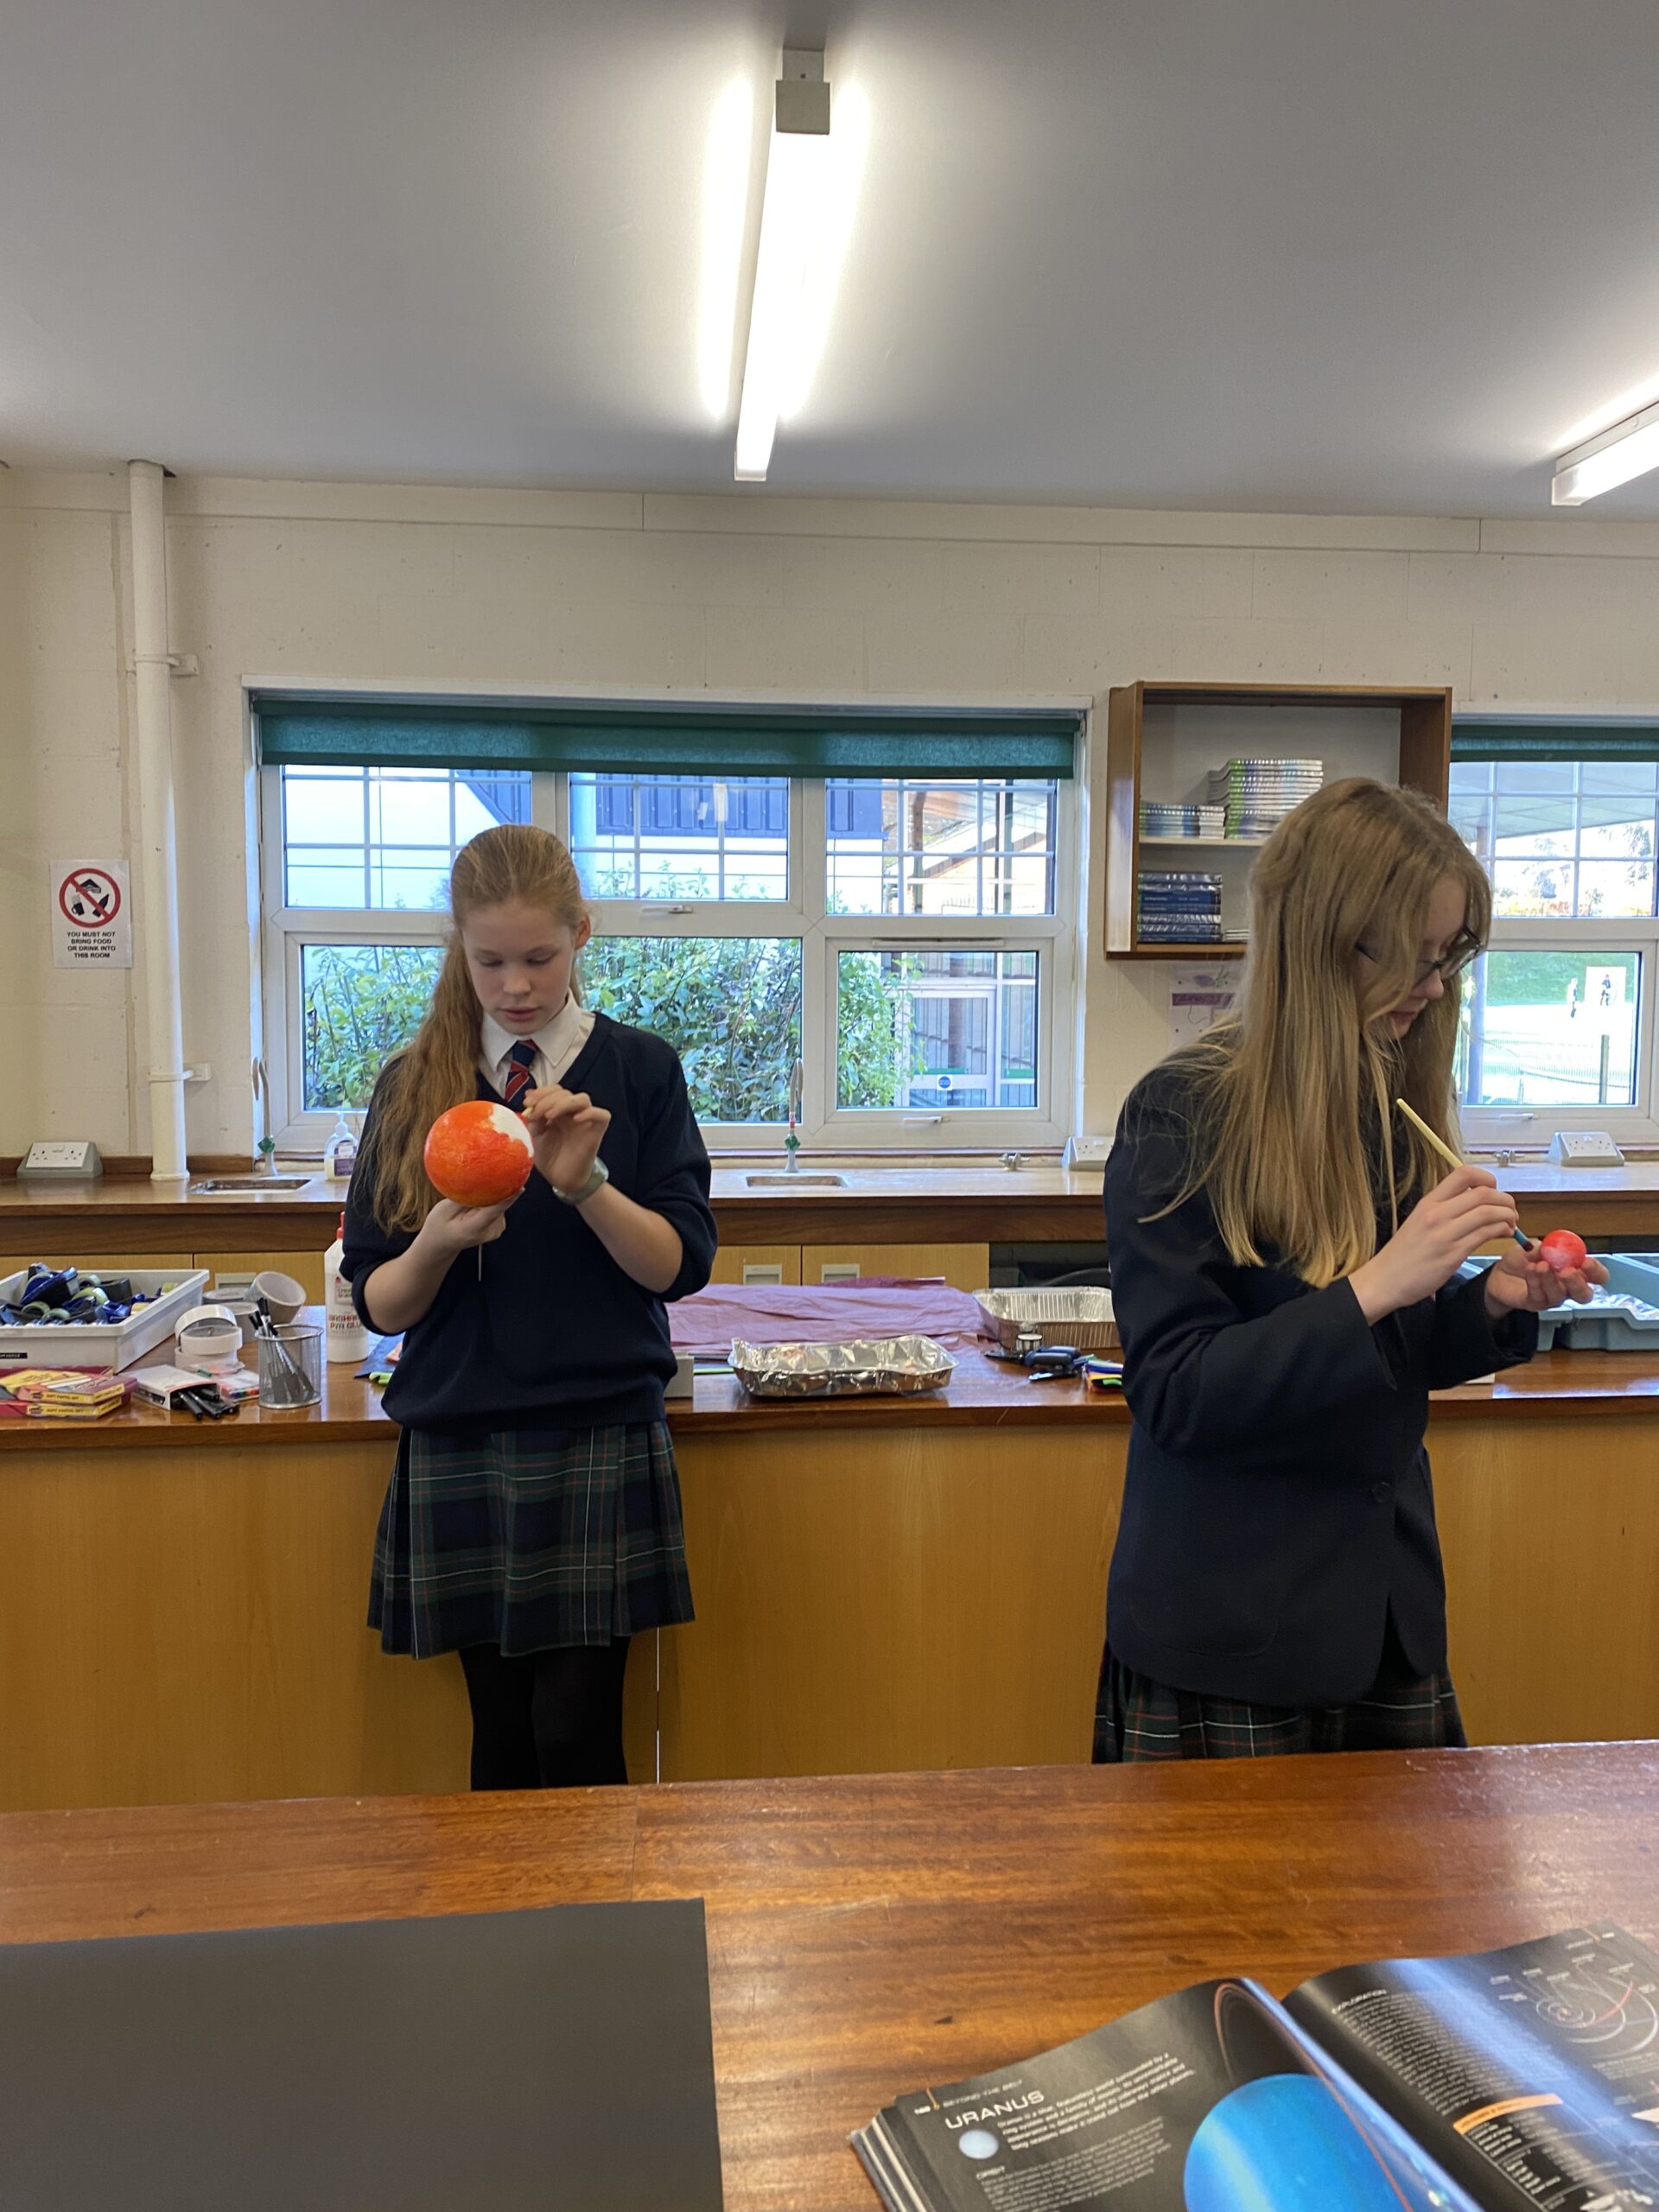 Getting our girls into STEM: Introducing the STEM Society 